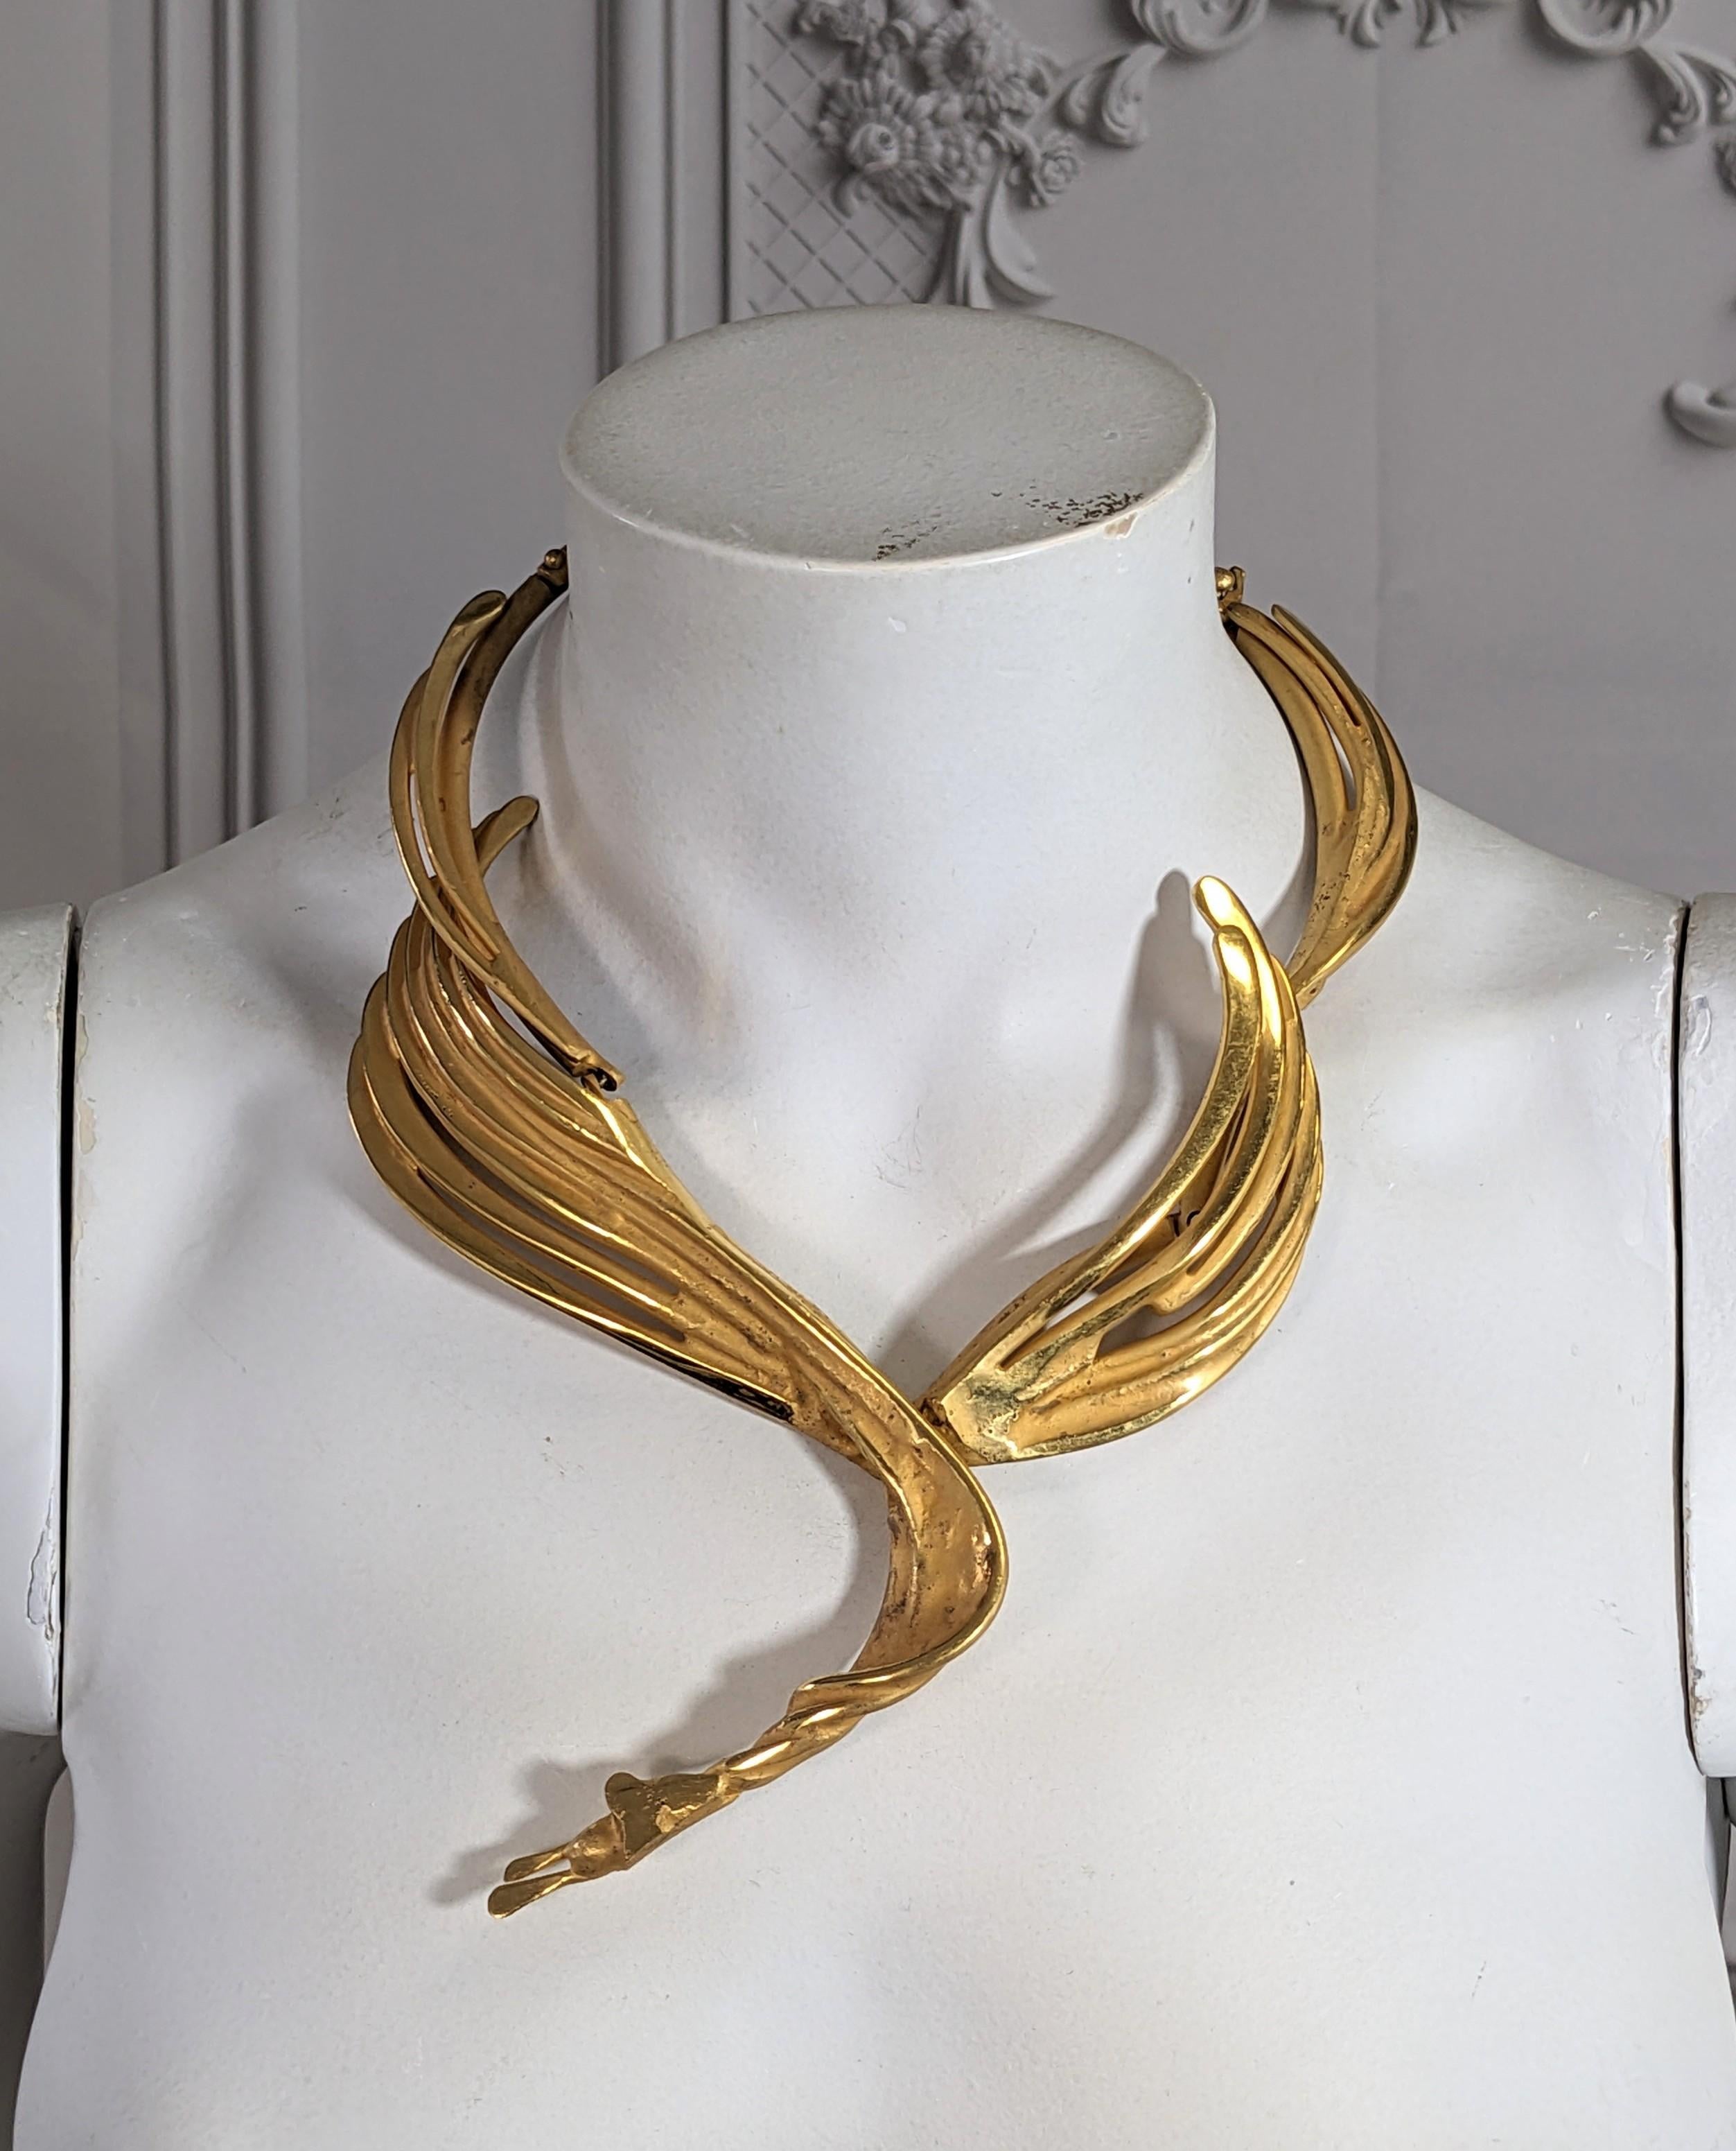 Dramatic French Winged Bronze Artisanal Collar For Sale 3